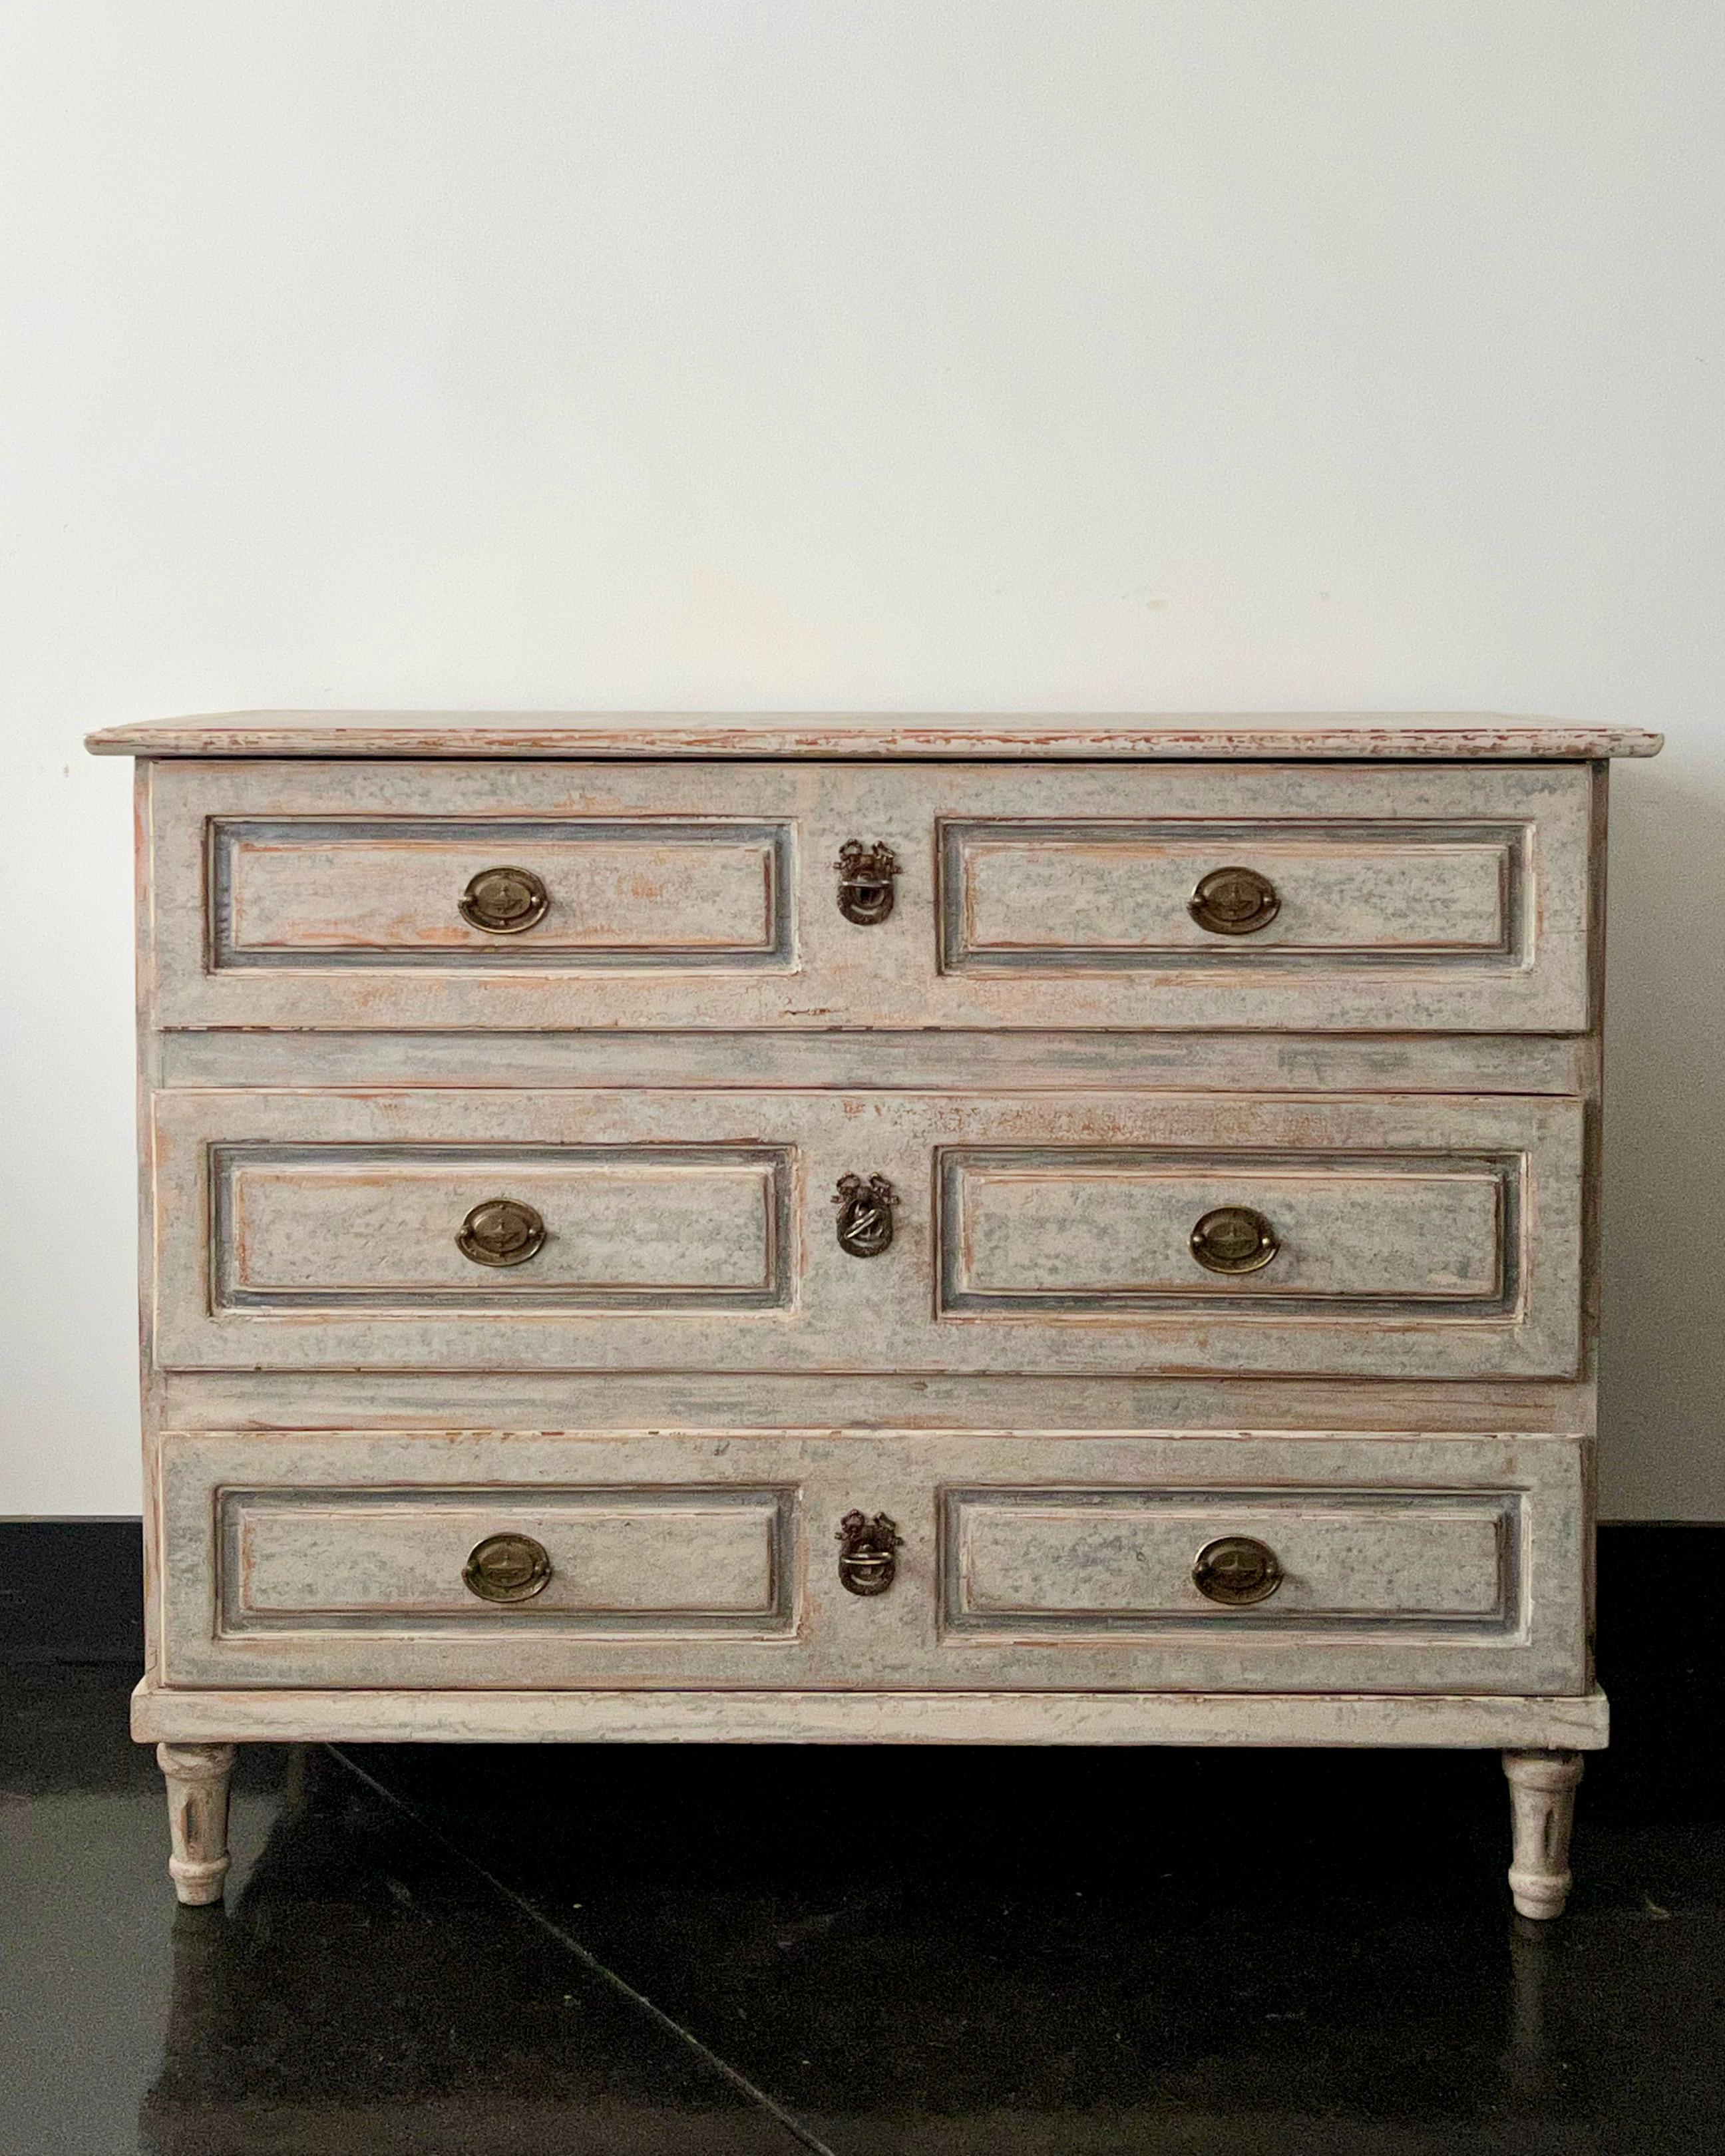 18th century French Louis XVI period chest of drawers with chest of three sizeble drawers with raised panel drawer fronts, original hardwares on tapered carved legs.
Hand painted re-finish.
 